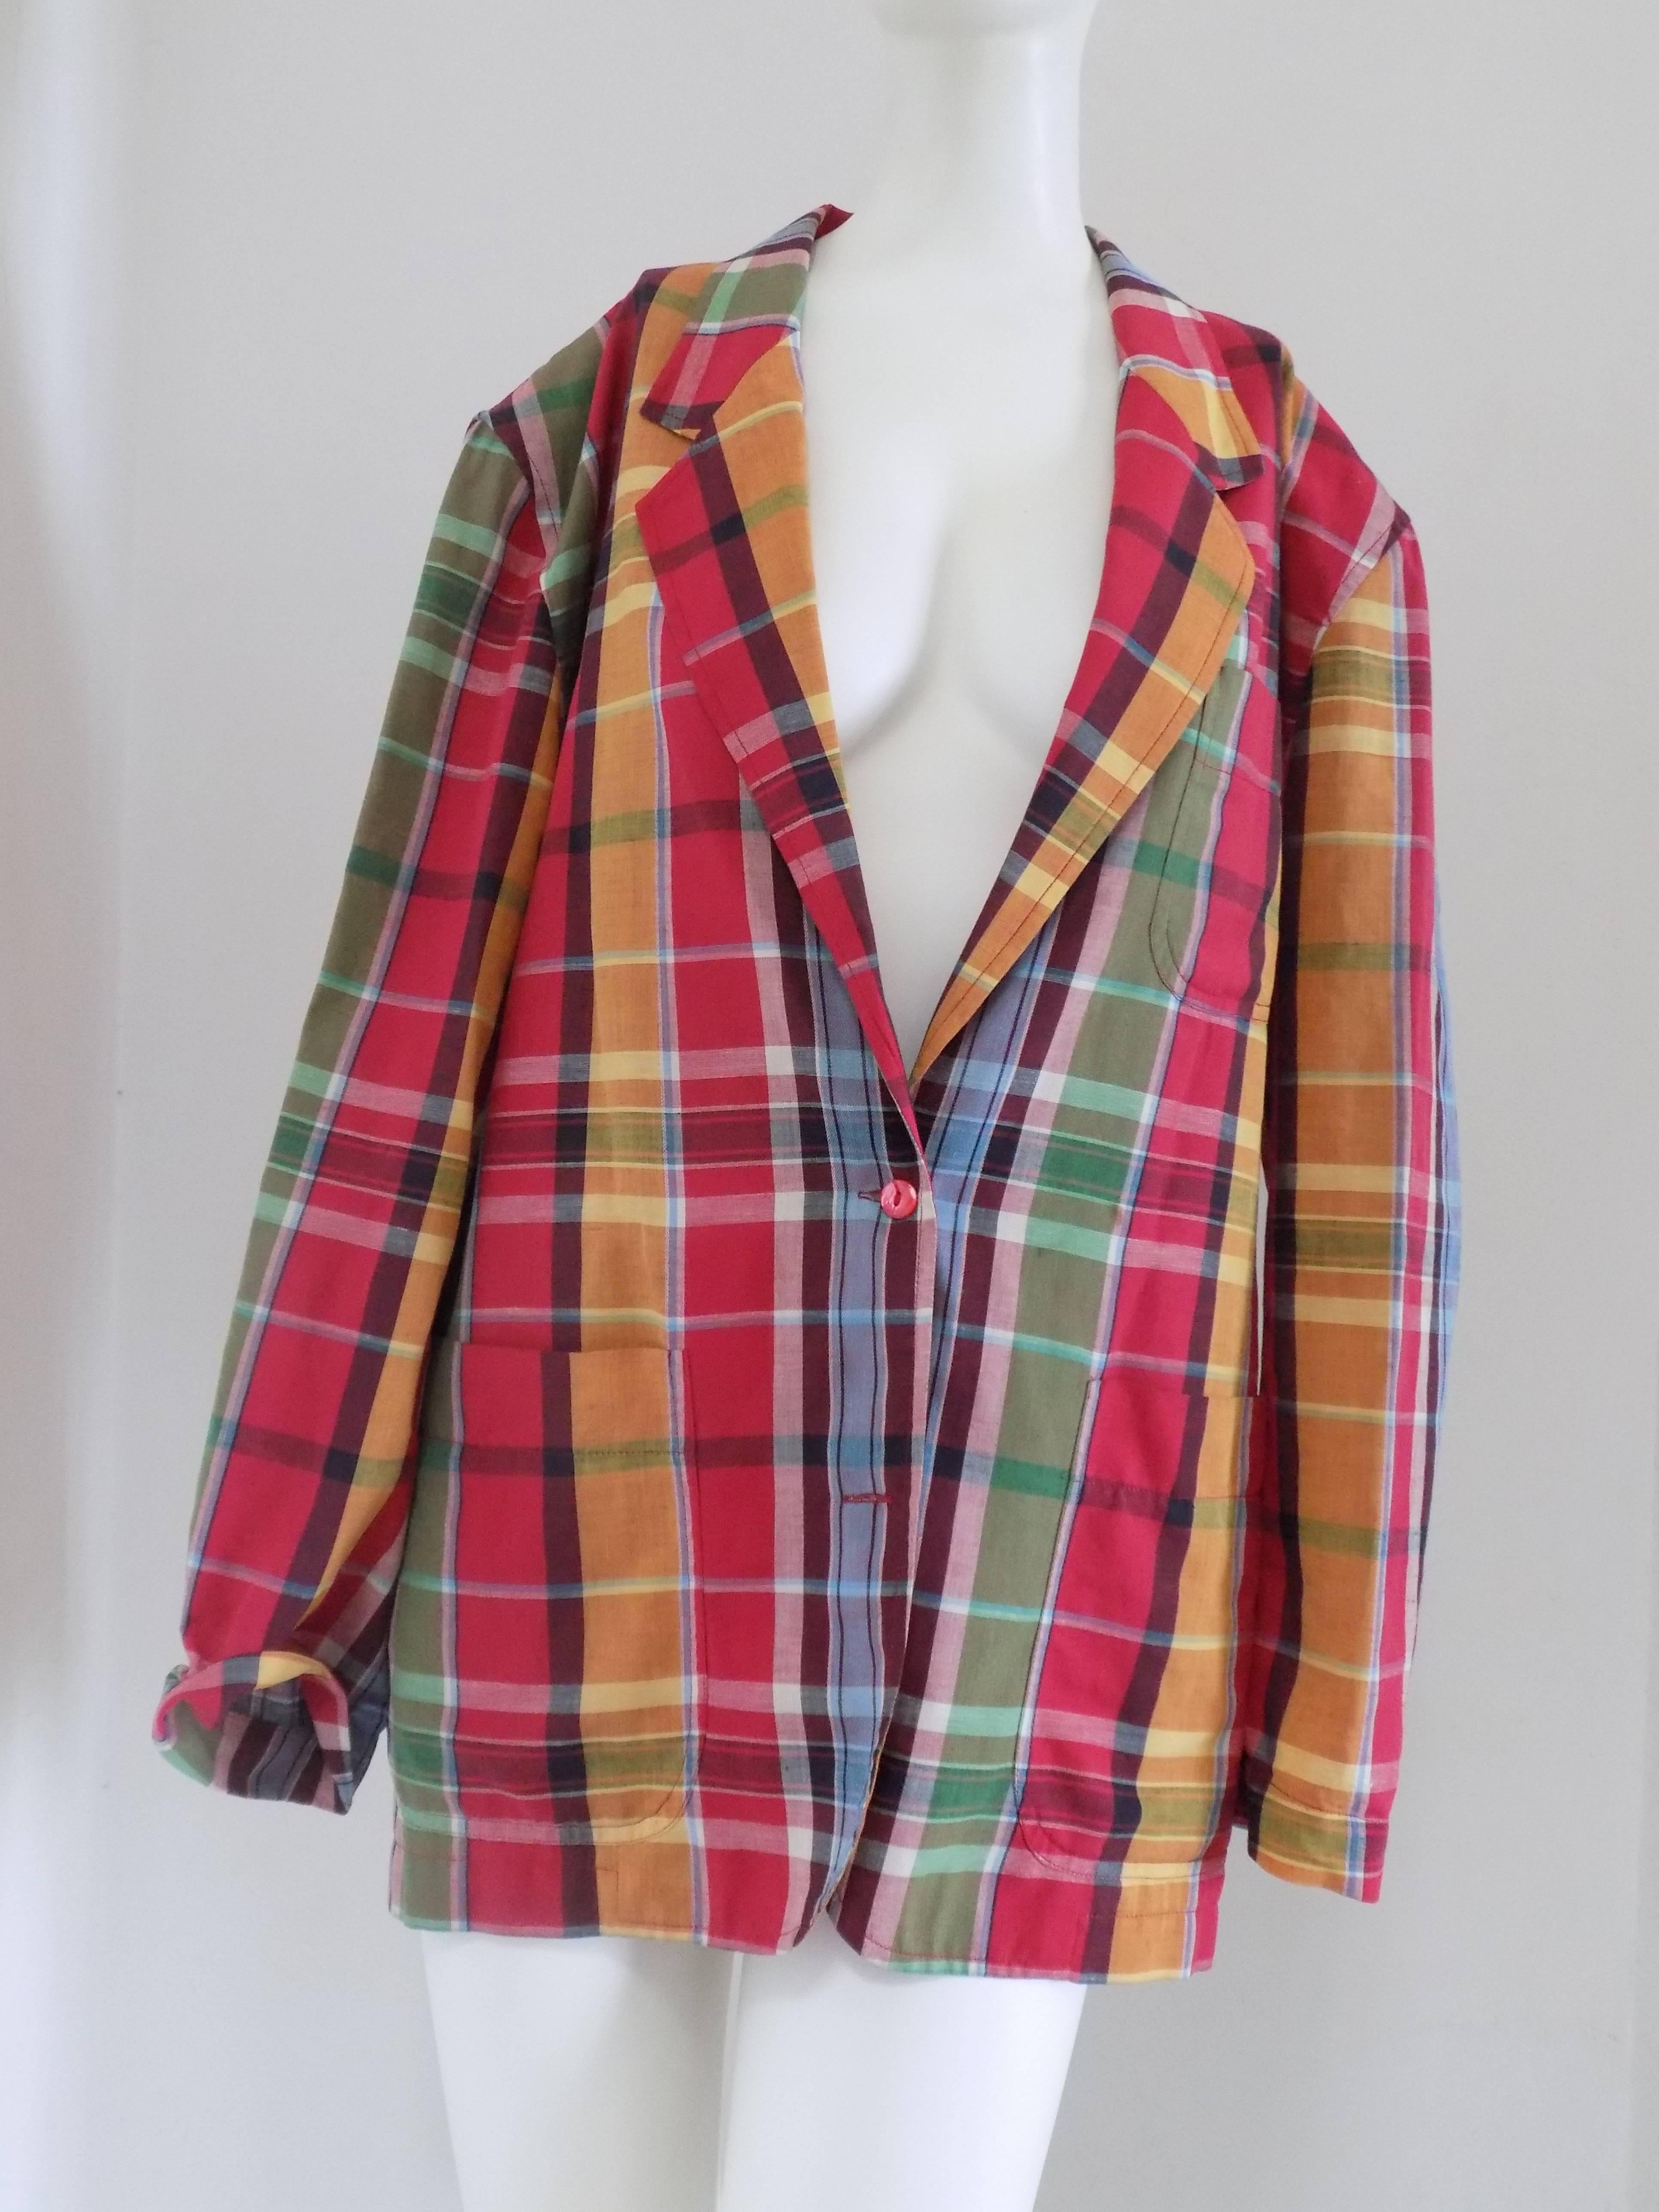 1990s Kenzo multicoulour checked linen cotton Jacket  shirt
Made in France in size 42